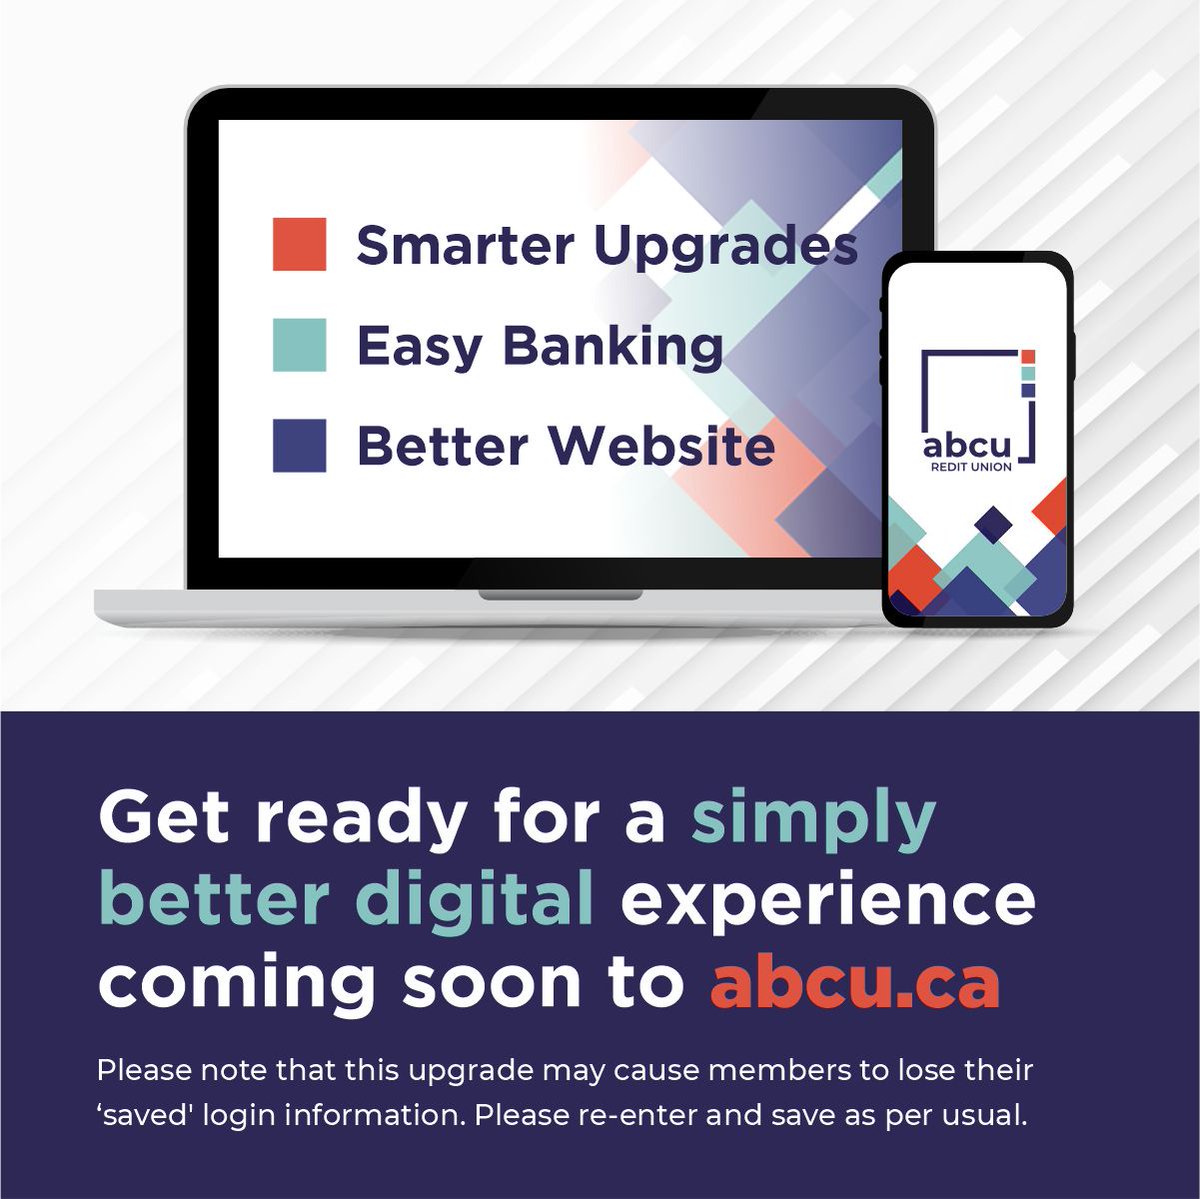 Get ready for Smarter, Easier, Better online banking coming soon! Our new website and online banking experience is launching soon.

Details: abcu.ca/Personal/About…

#DigitalBanking #DigitalGlowUp #SimplyBetterBanking